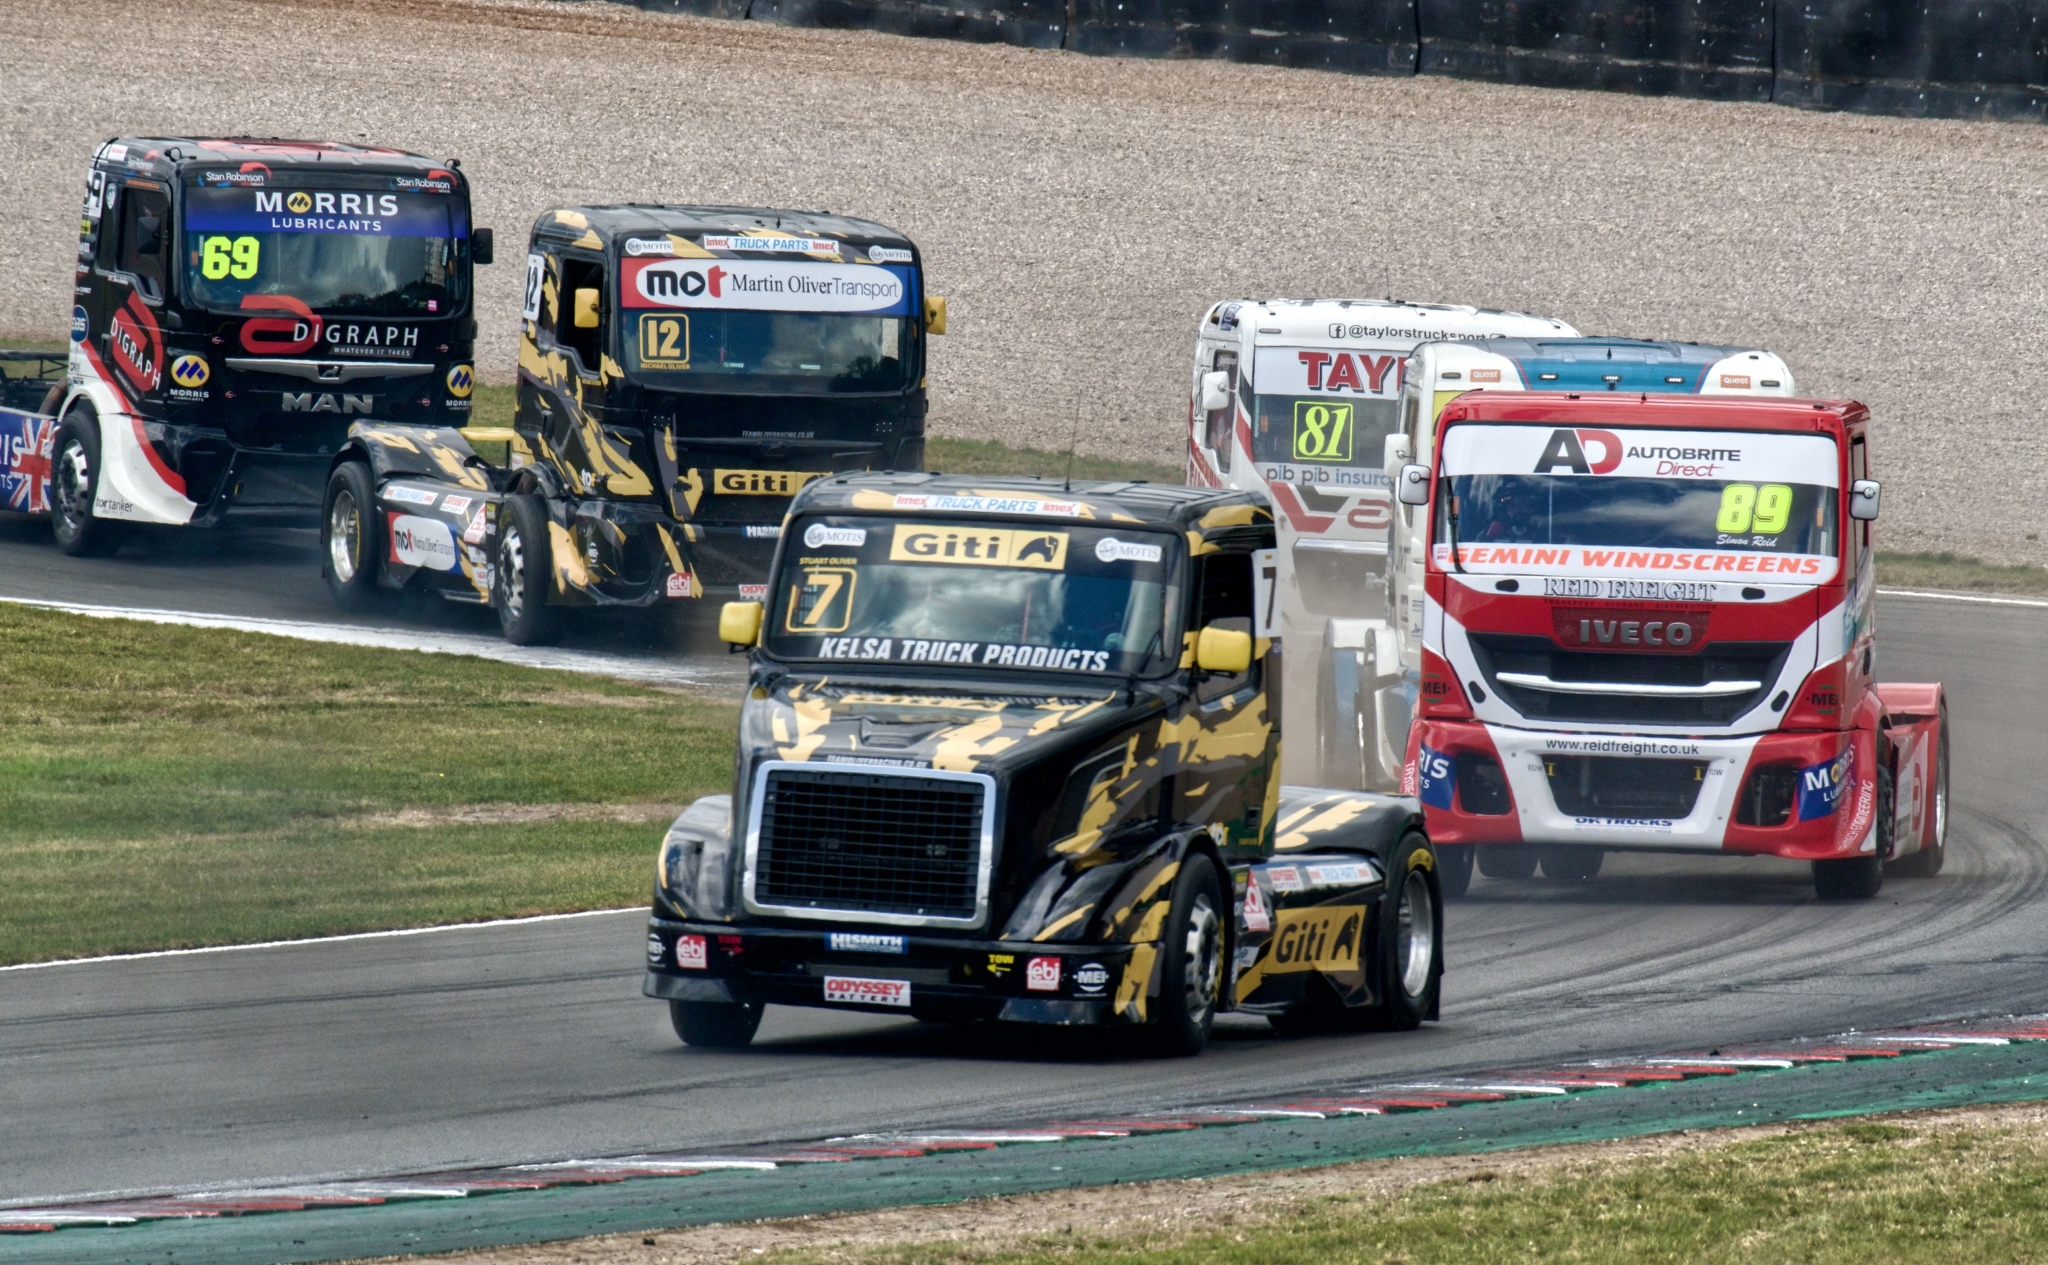 Giti Tire truck racing: BTRC positions brand centre-stage with Top Gear